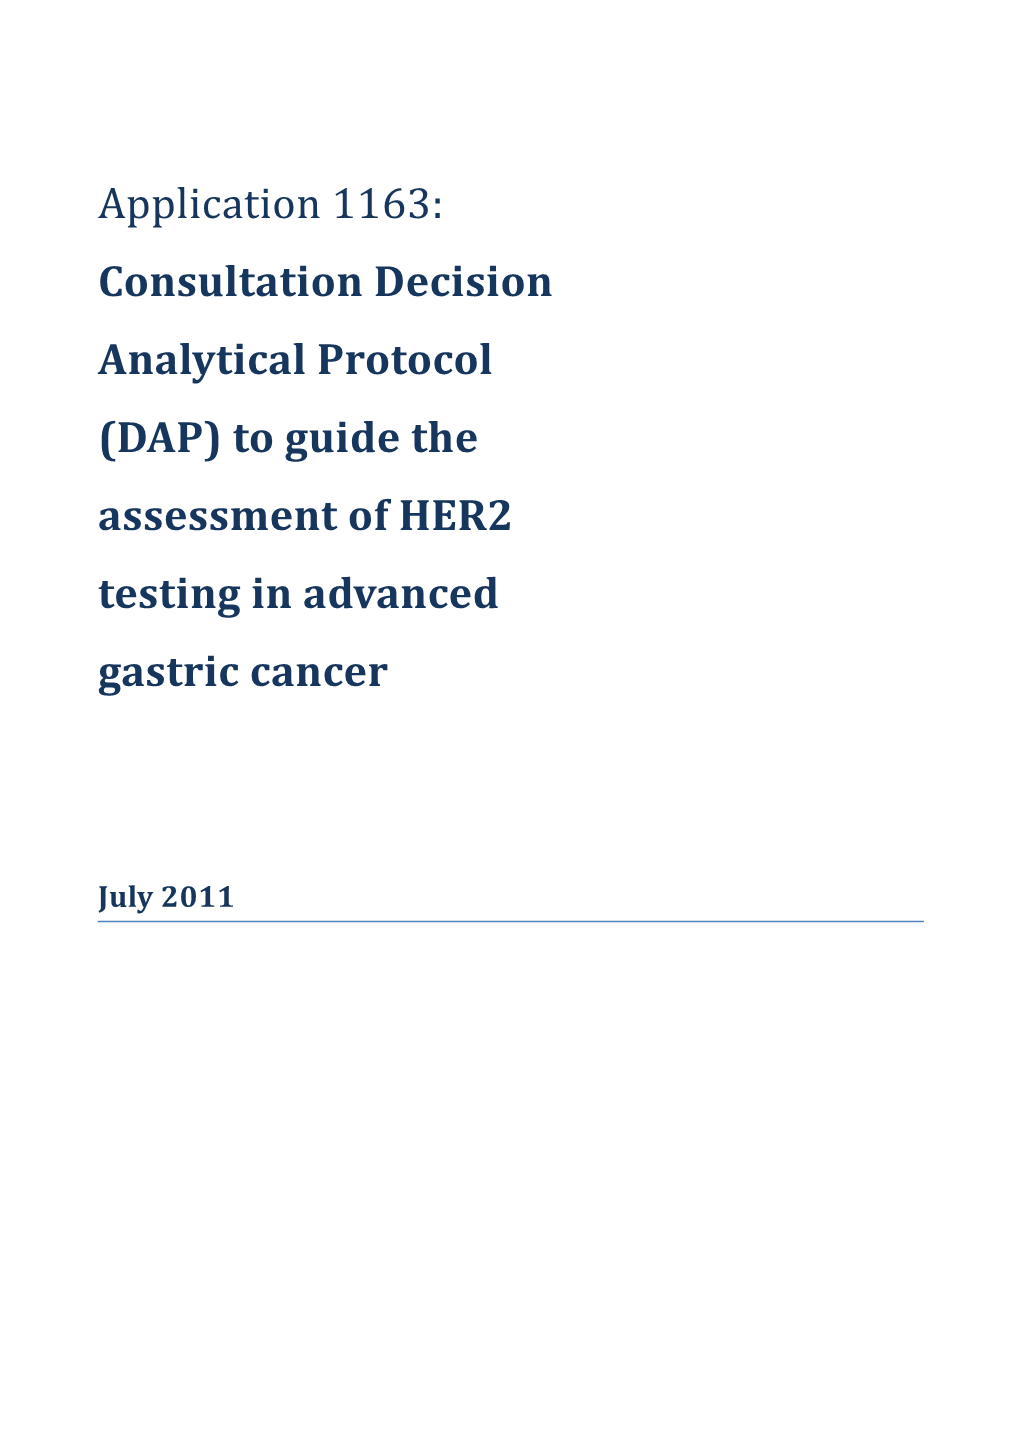 Draft Protocol to Guide the Assessment of HER2 Testing in Advanced Gastric Cancer